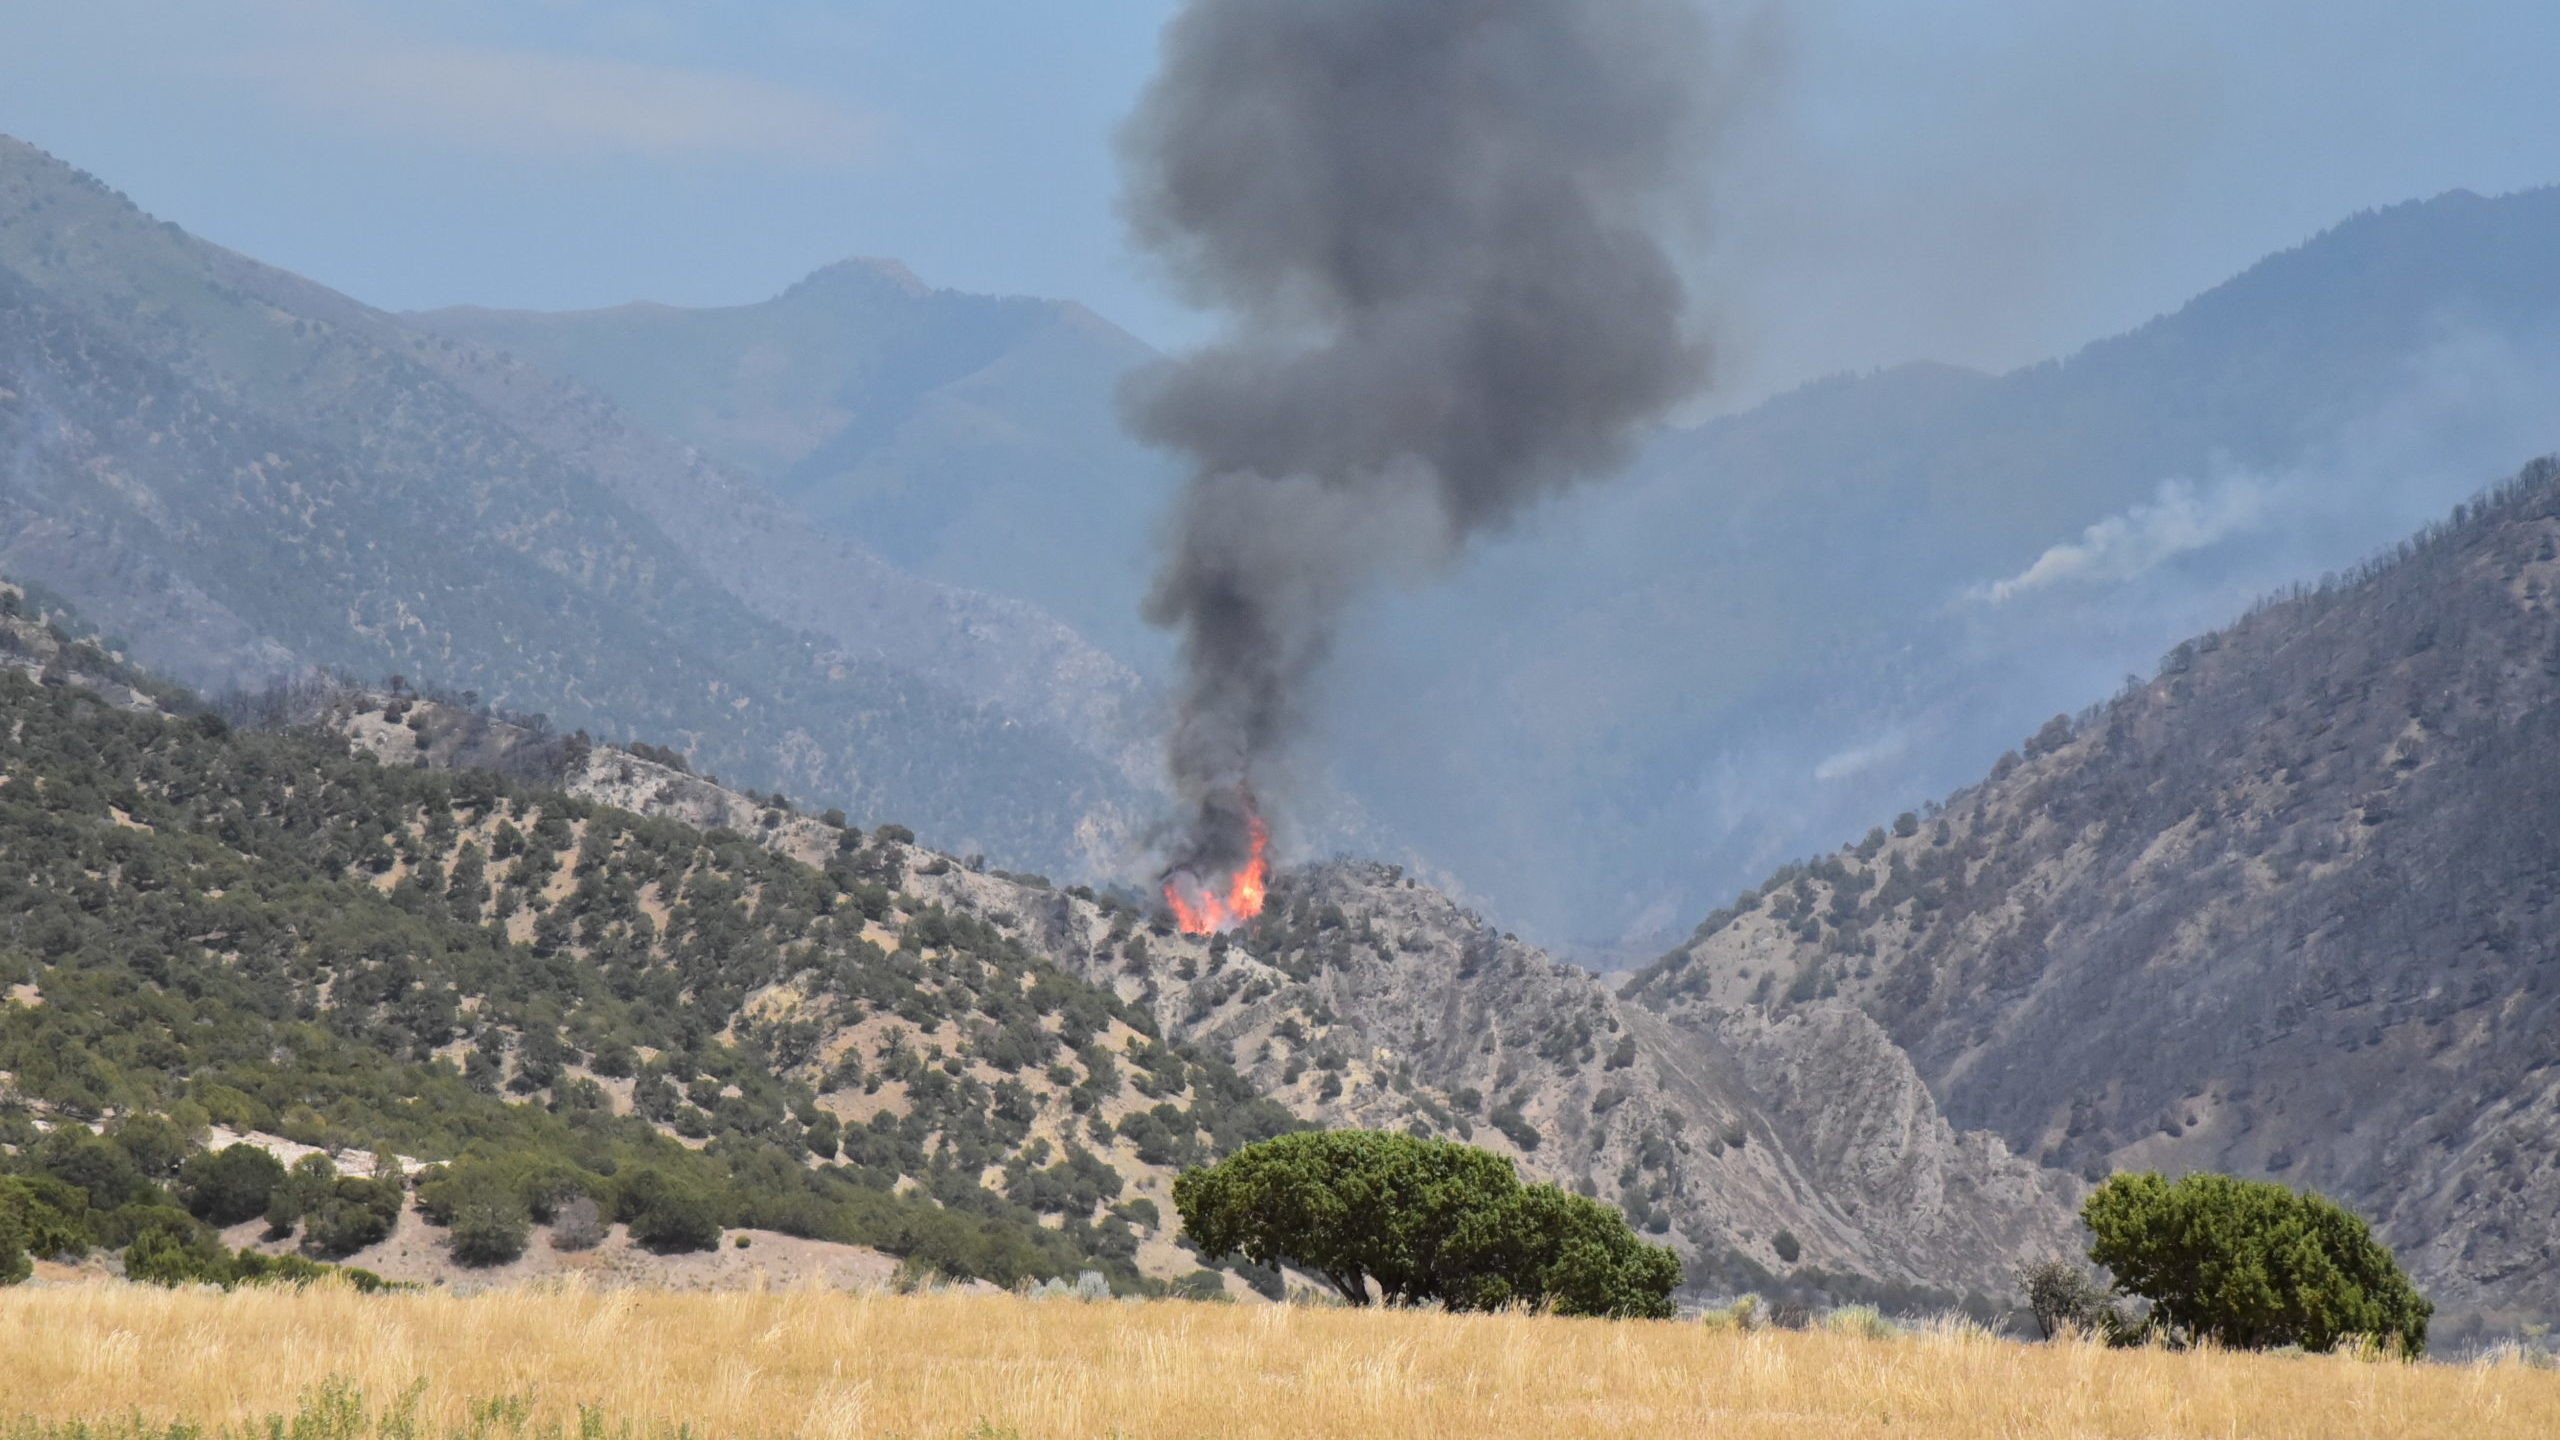 The closure of public lands in the area of the Jacob City Fire was announced Wednesday as authoriti...